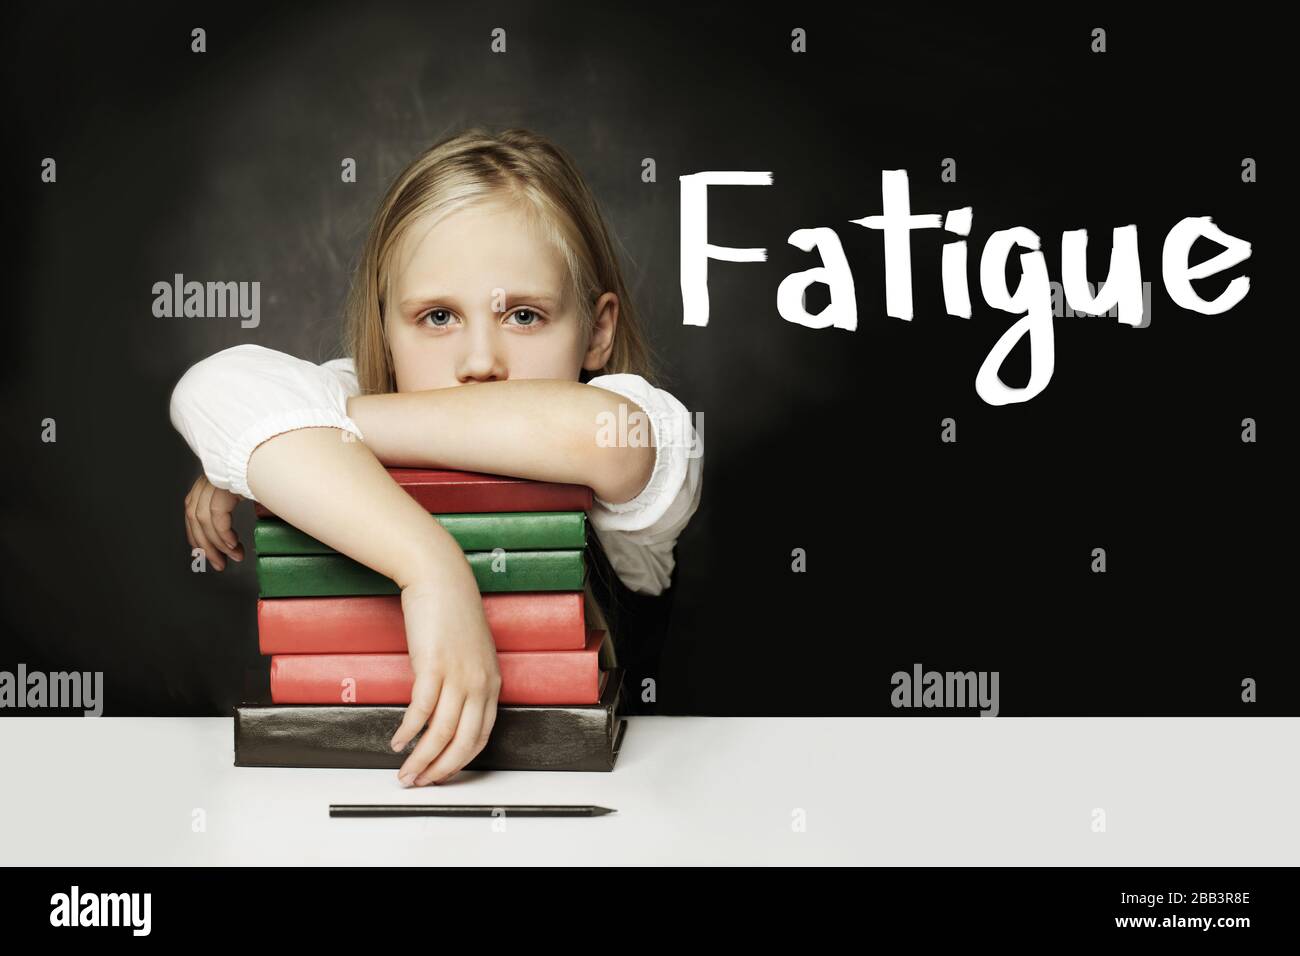 Sad Tired child girl with books. Fatigue concept Stock Photo